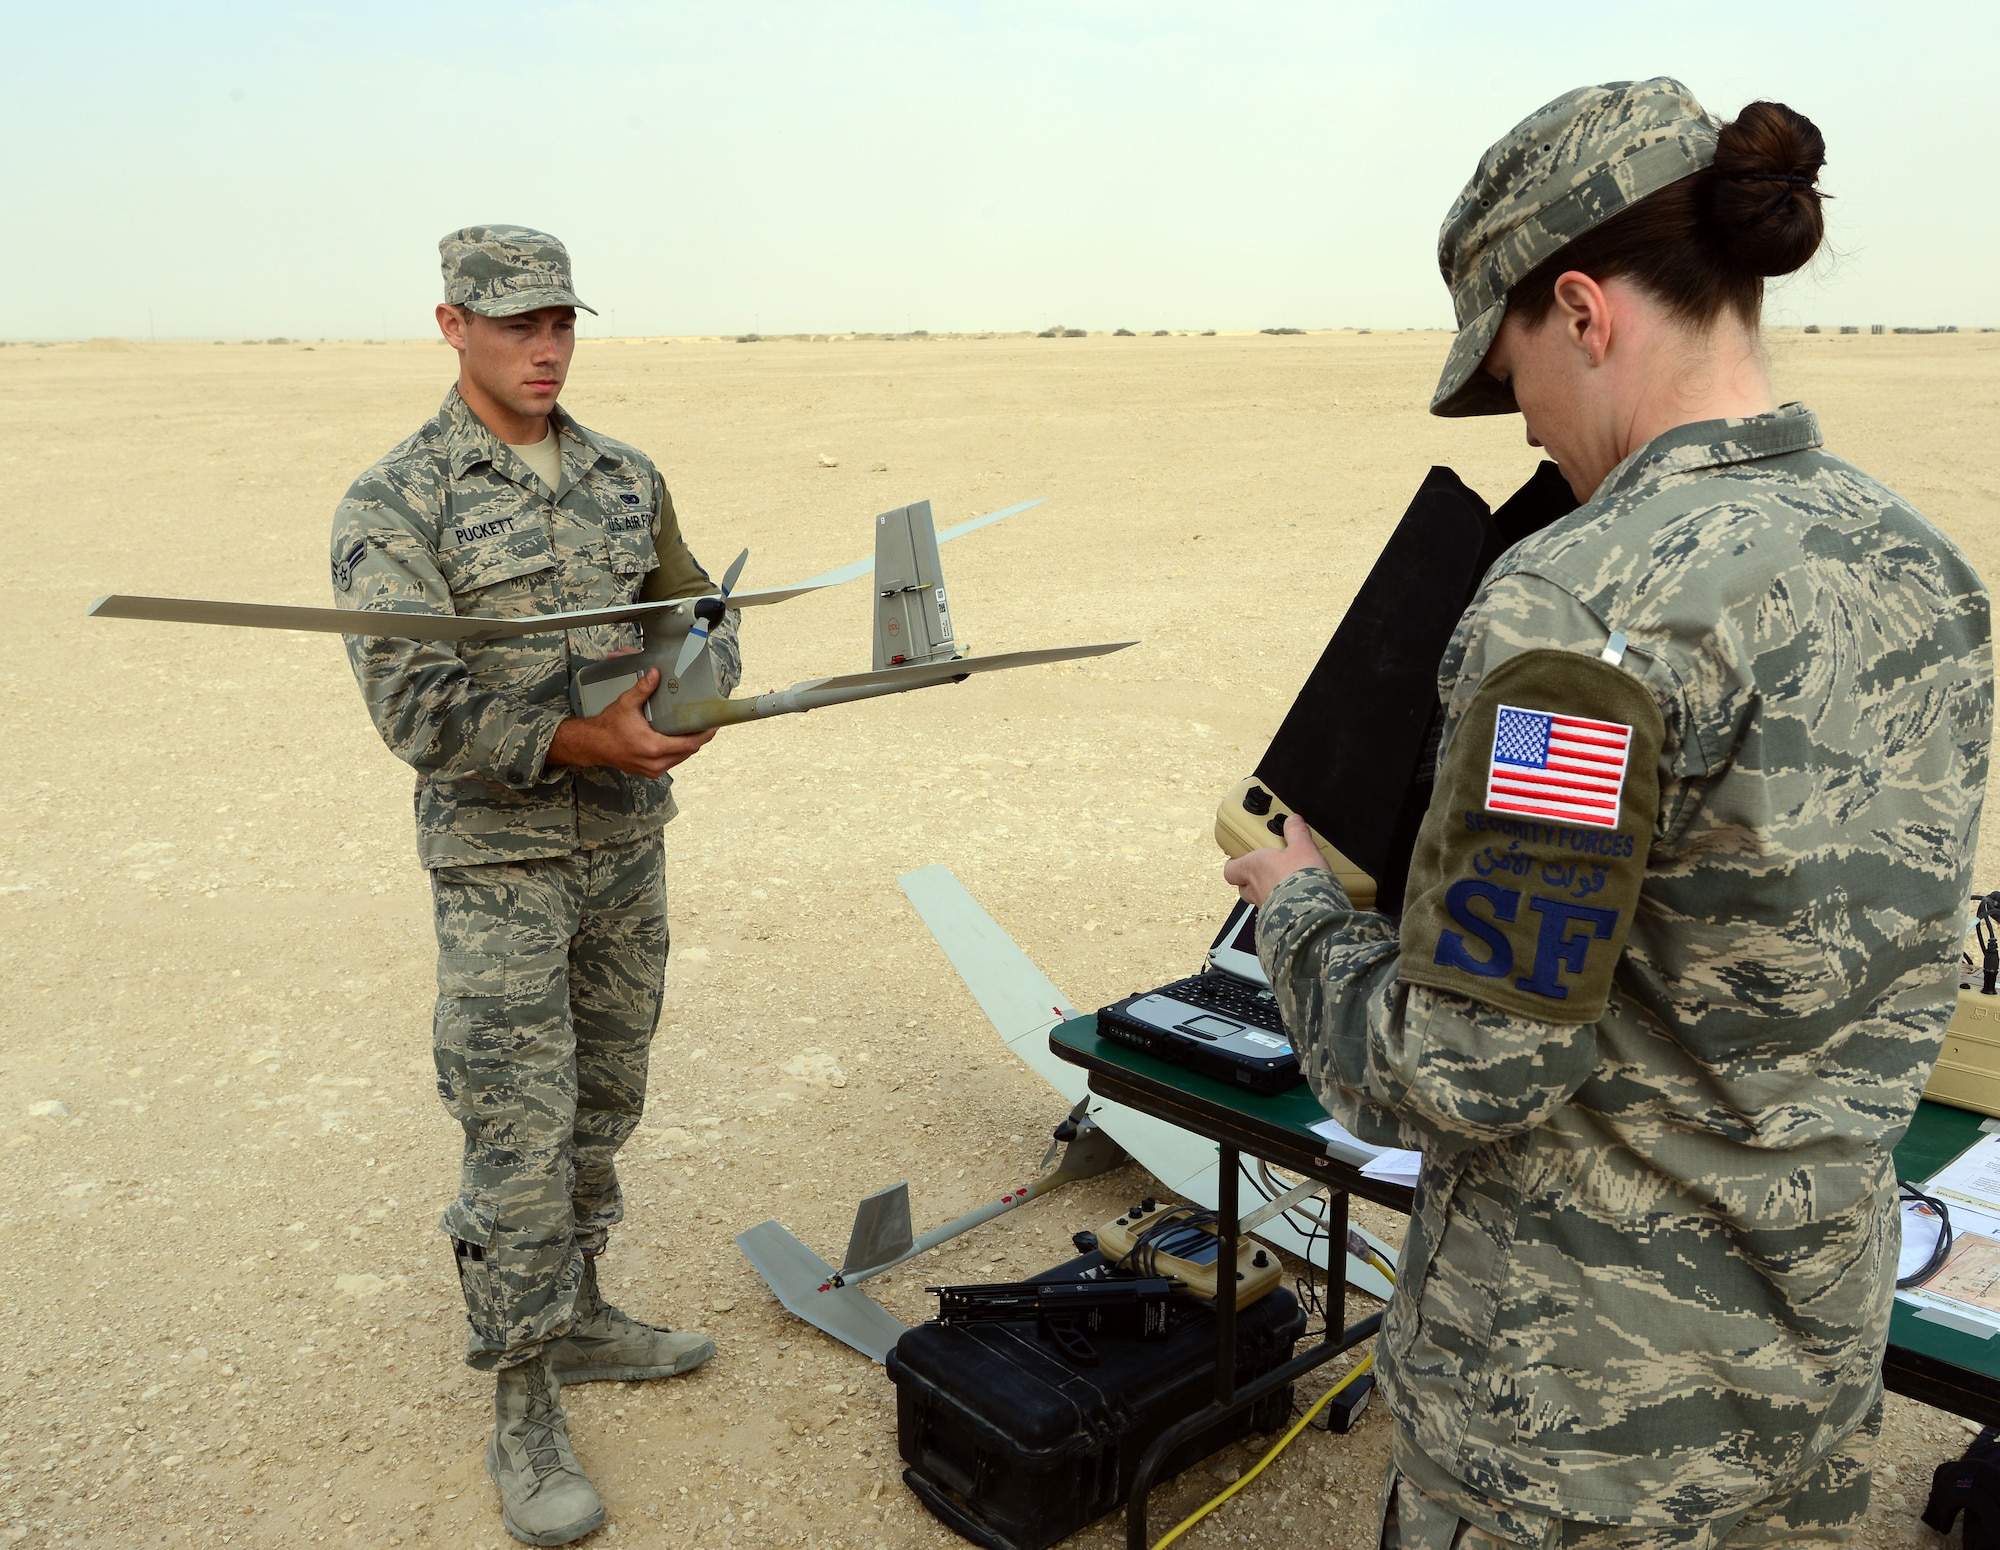 Airman Michael Puckett (left) and SSgt Elizabeth Henderson, 379th Expeditionary Security Forces Squadron, conduct pre-flight checks for an R-11B Raven at Al Udeid Air Base, Qatar, Mar 4, 2015, before an aerial demonstration for senior Qatari Air Force and 379th Air Expeditionary Wing leaders.  The RQ-11 Raven is a lightweight unmanned aircraft system that’s designed for rapid deployment and high-mobility for military operations. At Al Udeid, security forces Airmen use the Raven to support anti-terrorism measures like day or night aerial intelligence, surveillance, target acquisition, and reconnaissance. This is the first time since 2005 that the Raven has been used at Al Udeid. (Air Force photo by Master Sgt. Kerry Jackson) 